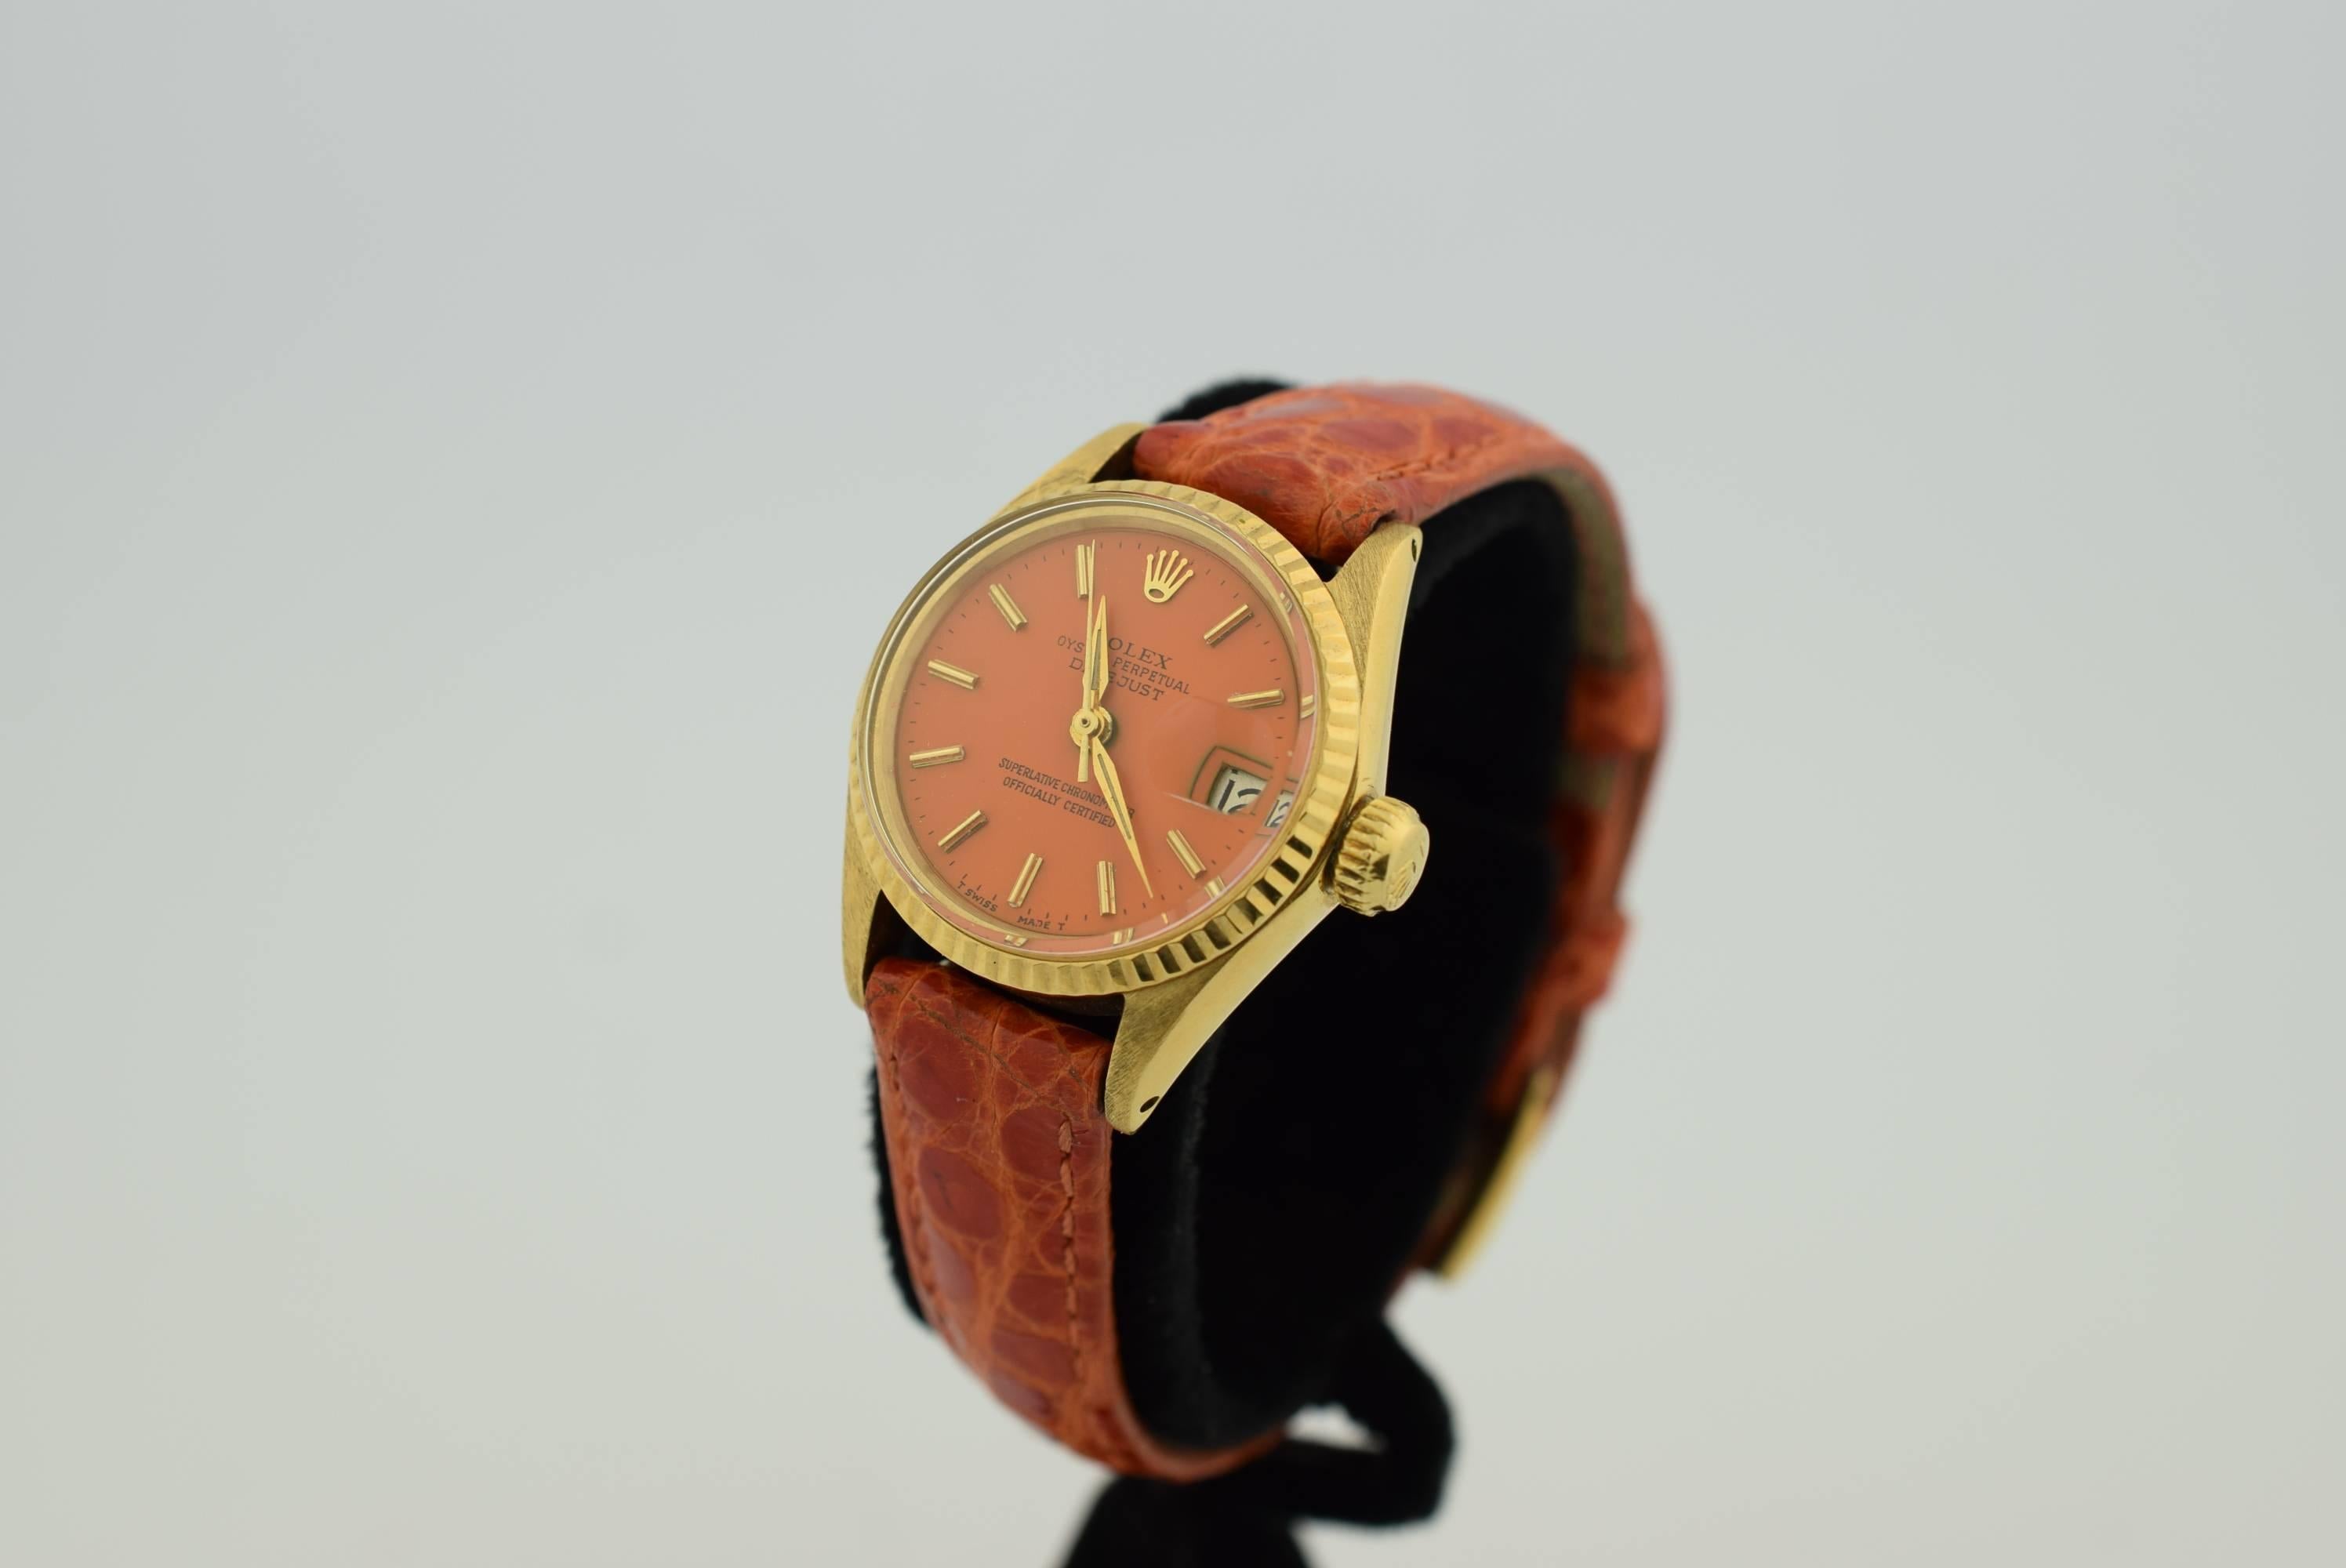 Rolex Ladys Oyster Perpetual  Datejust .18K Yellow Gold .President Head .
Circa :1960. Automatic movement .Refreshed Orange Dial with Gold Hour markers .Orange Crocodile Strap with Gold Plaque Rolex Buckle .Serial numbers :1329xxx.Comes with Rolex